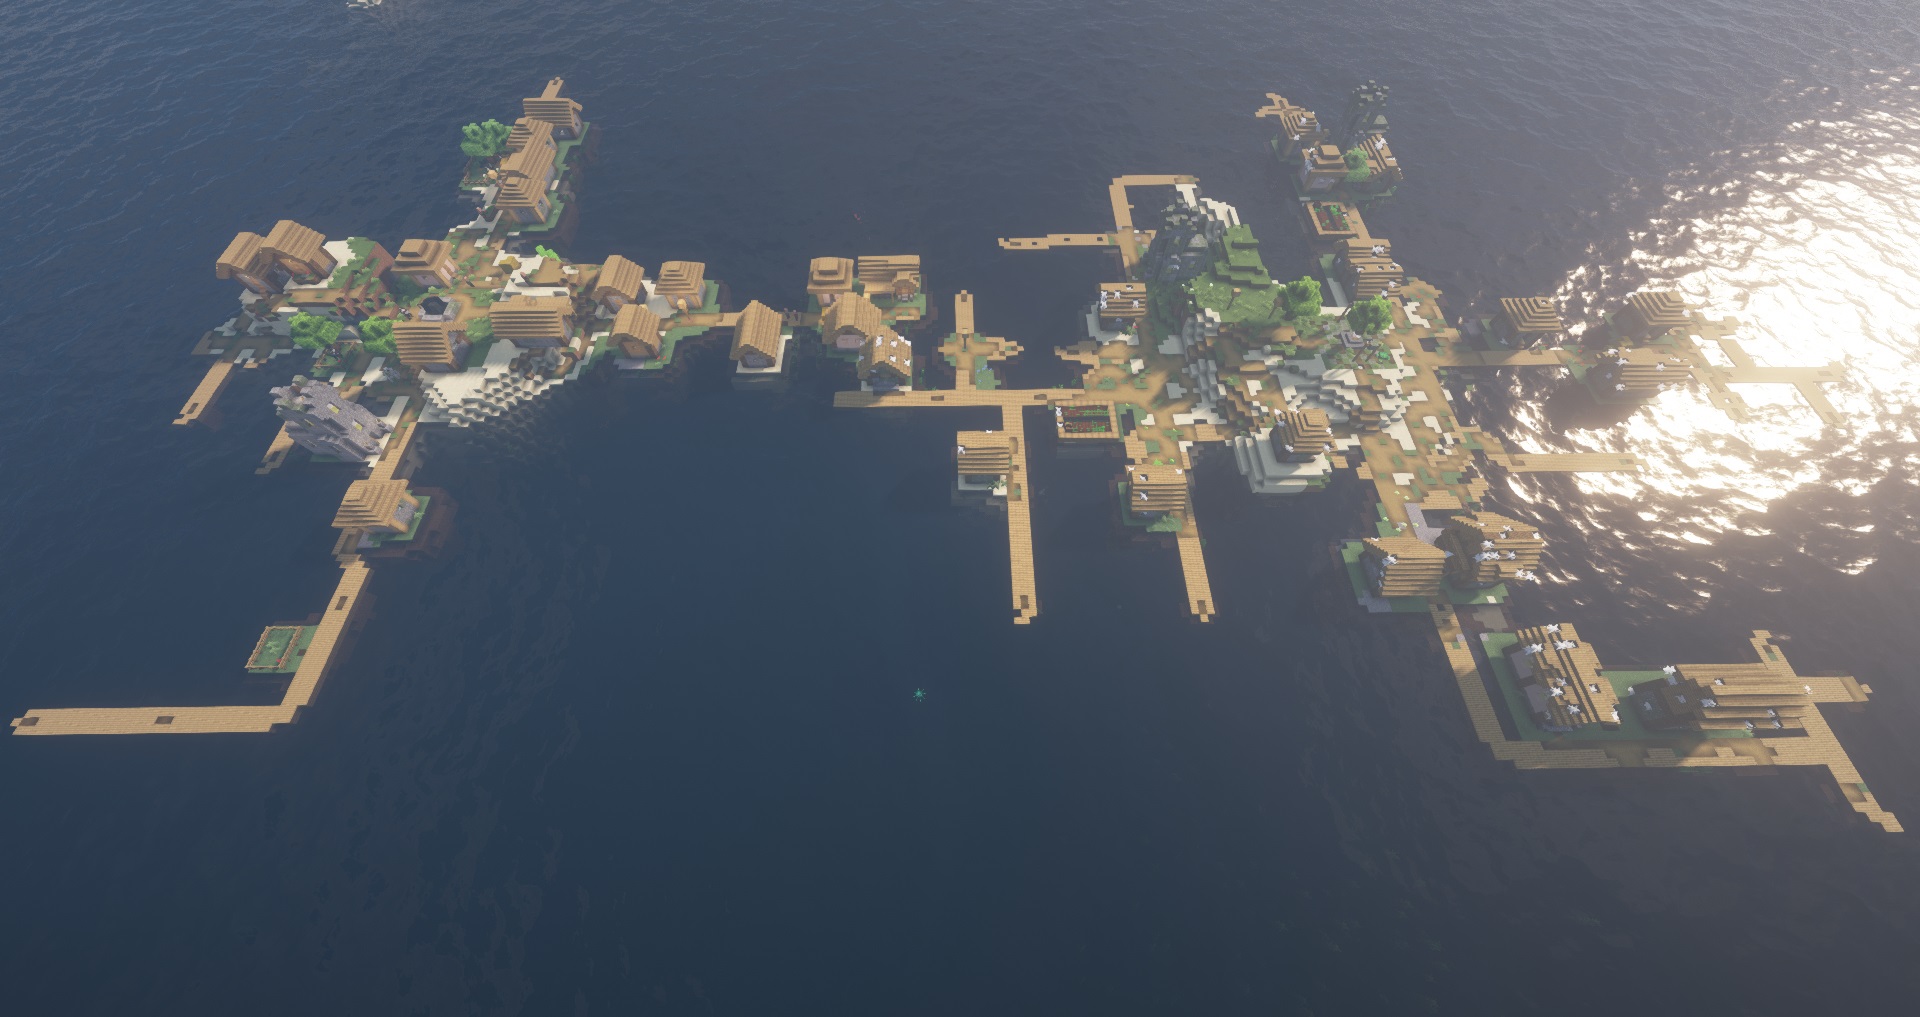 Mineacraft seed - two villages on opposite islands connected by an ocean bridge